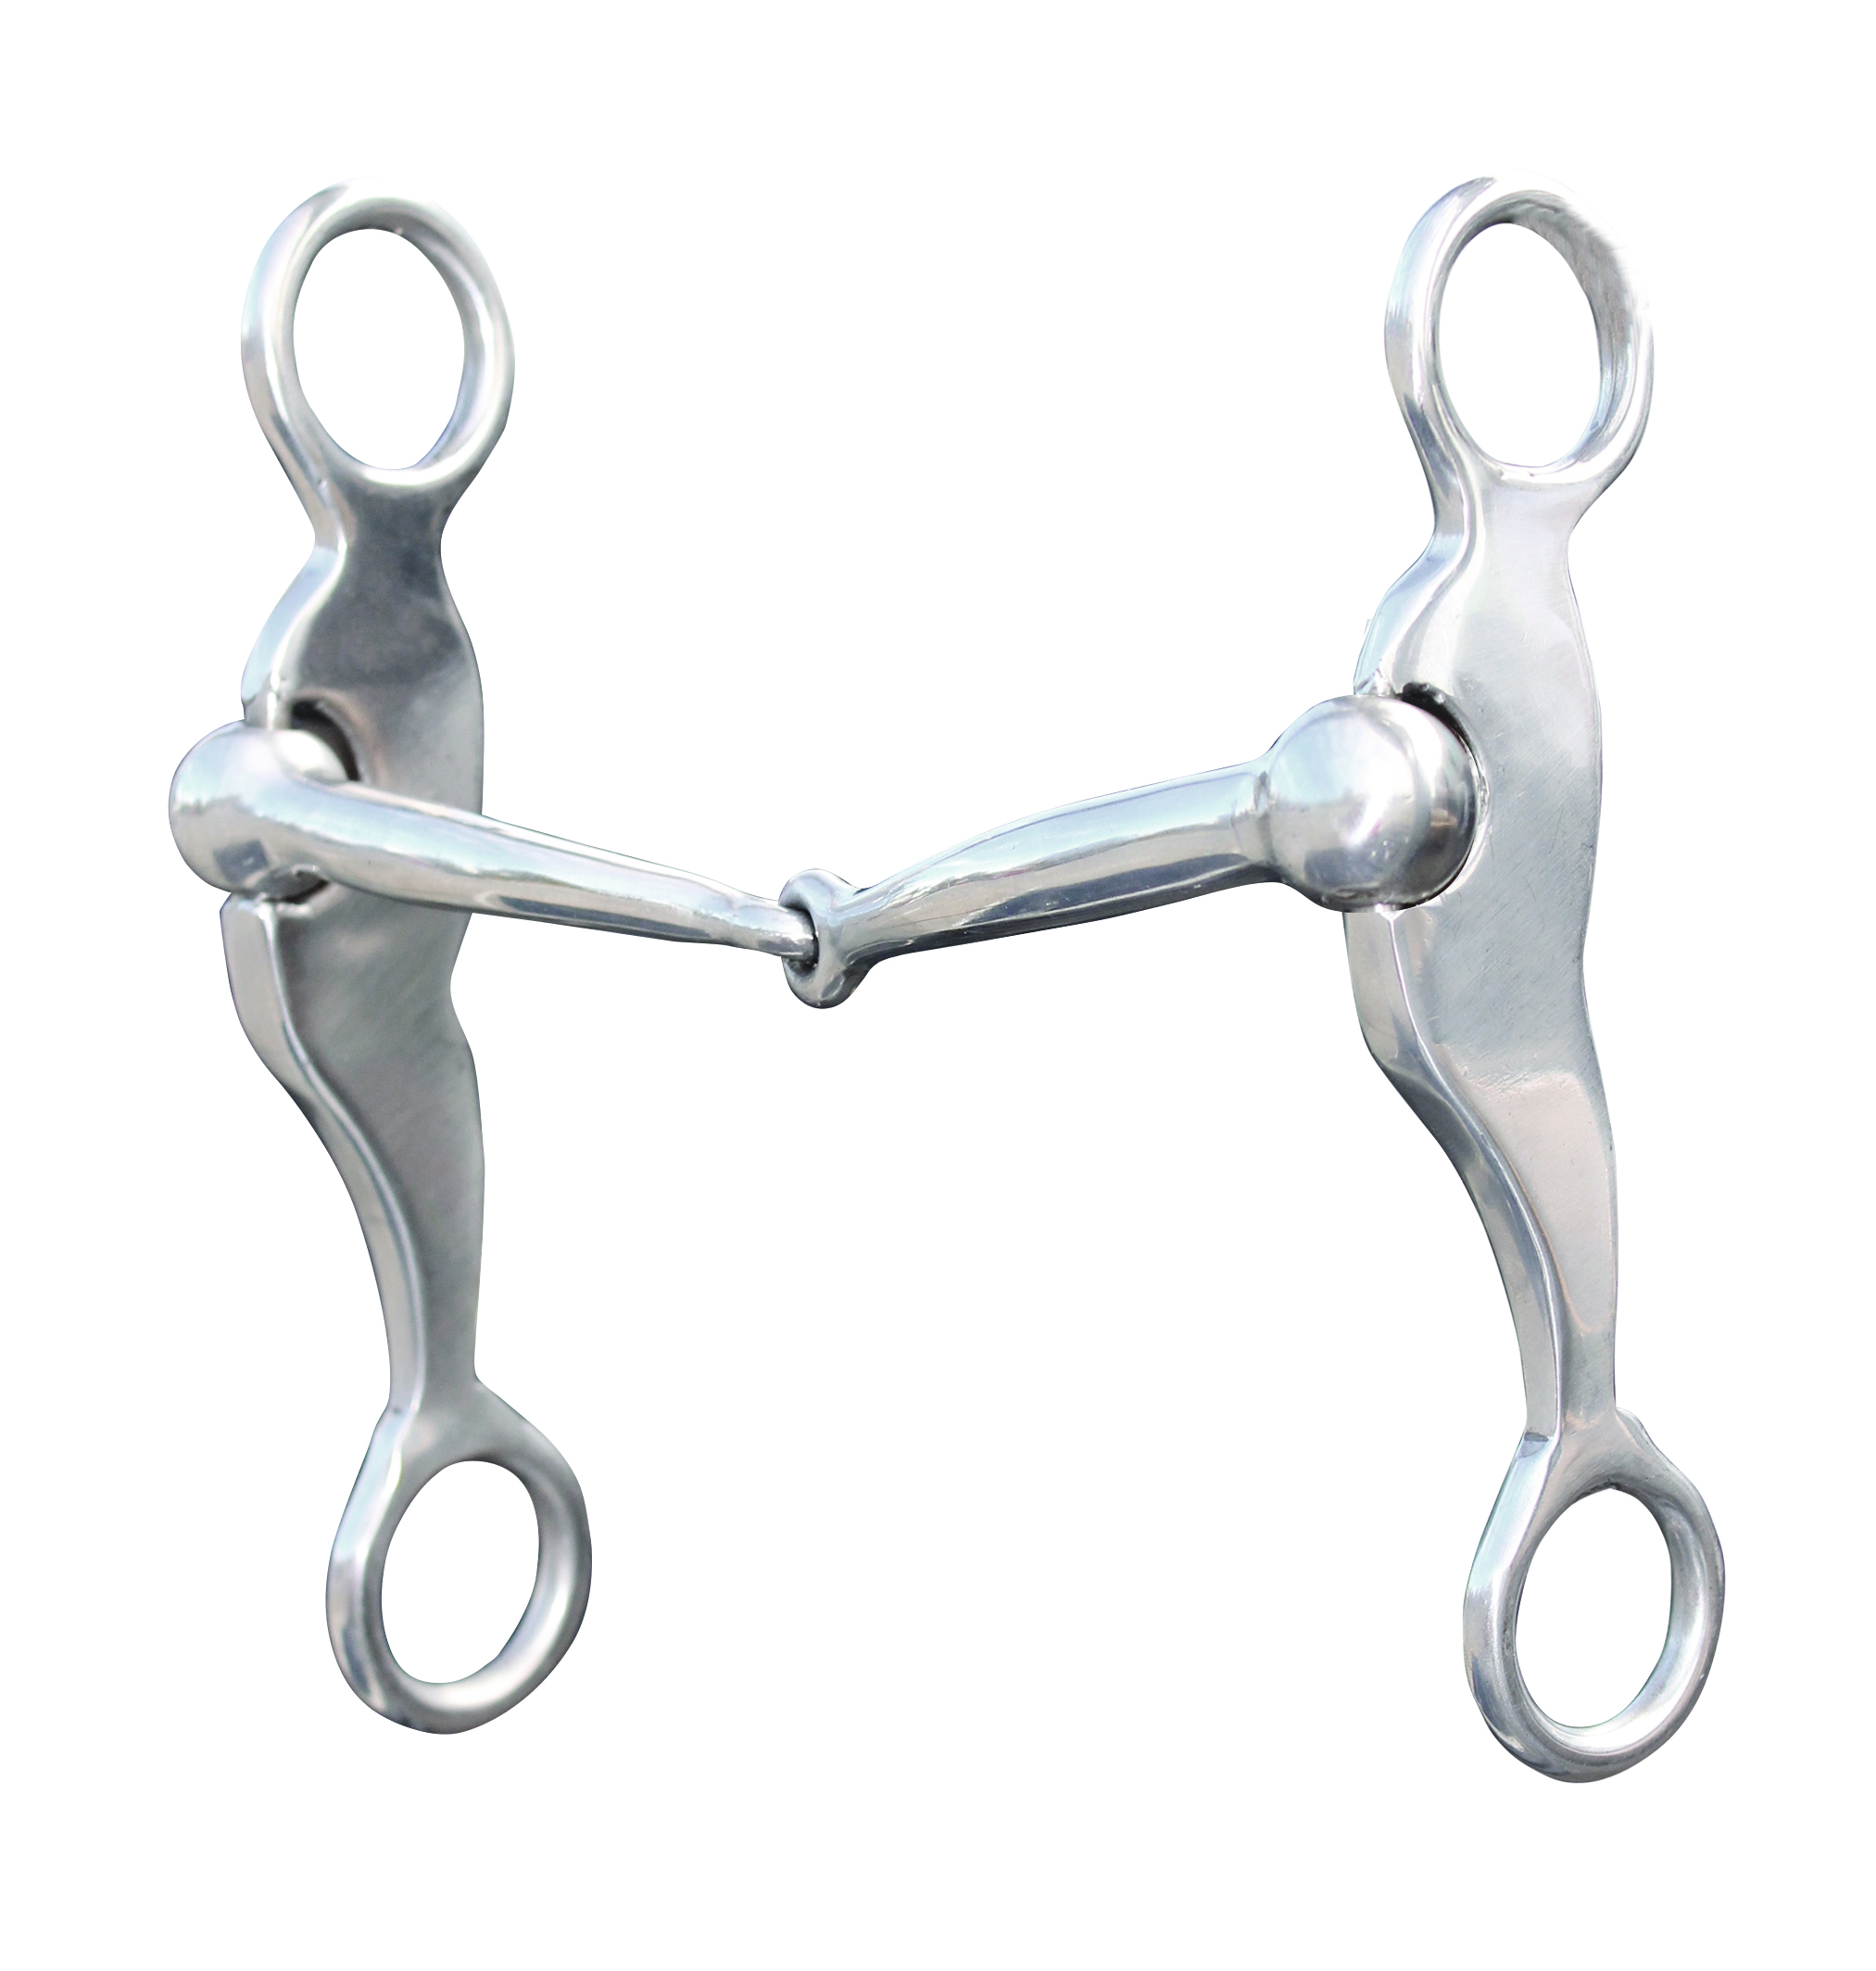 Professional Choice D Loose Ring Snaffle DoubleJoint Mouth Horse 7'' Bit BT-0062 